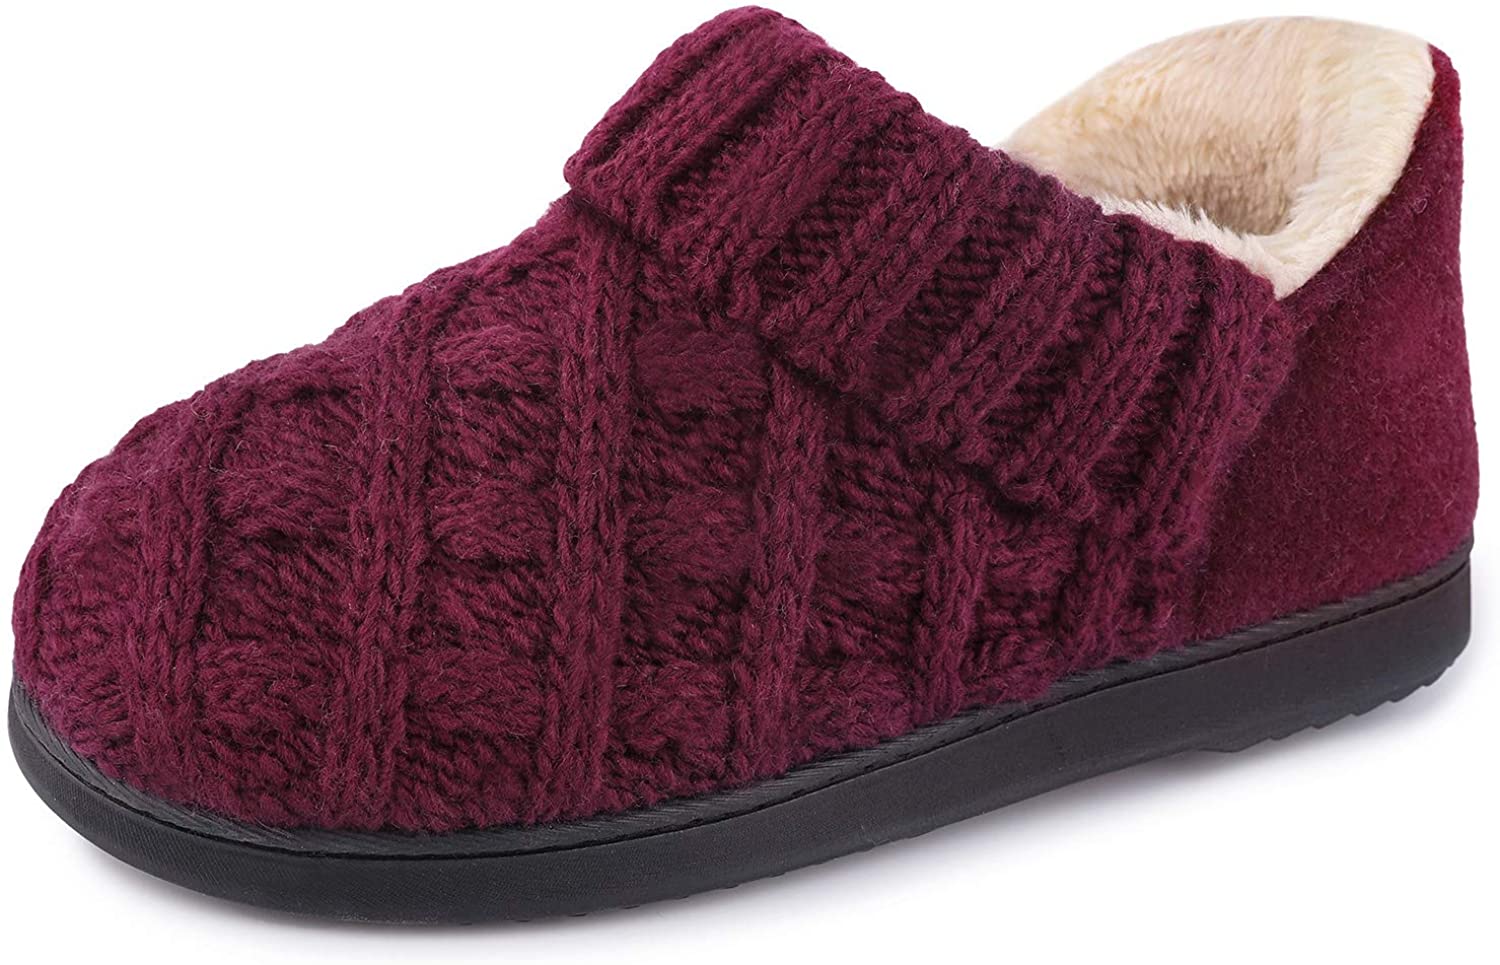 Women’s Warm Wool Yarn Cable Knitted Bootie Slippers Memory Foam Anti-Skid Sole House Shoes Indoor Outdoor 